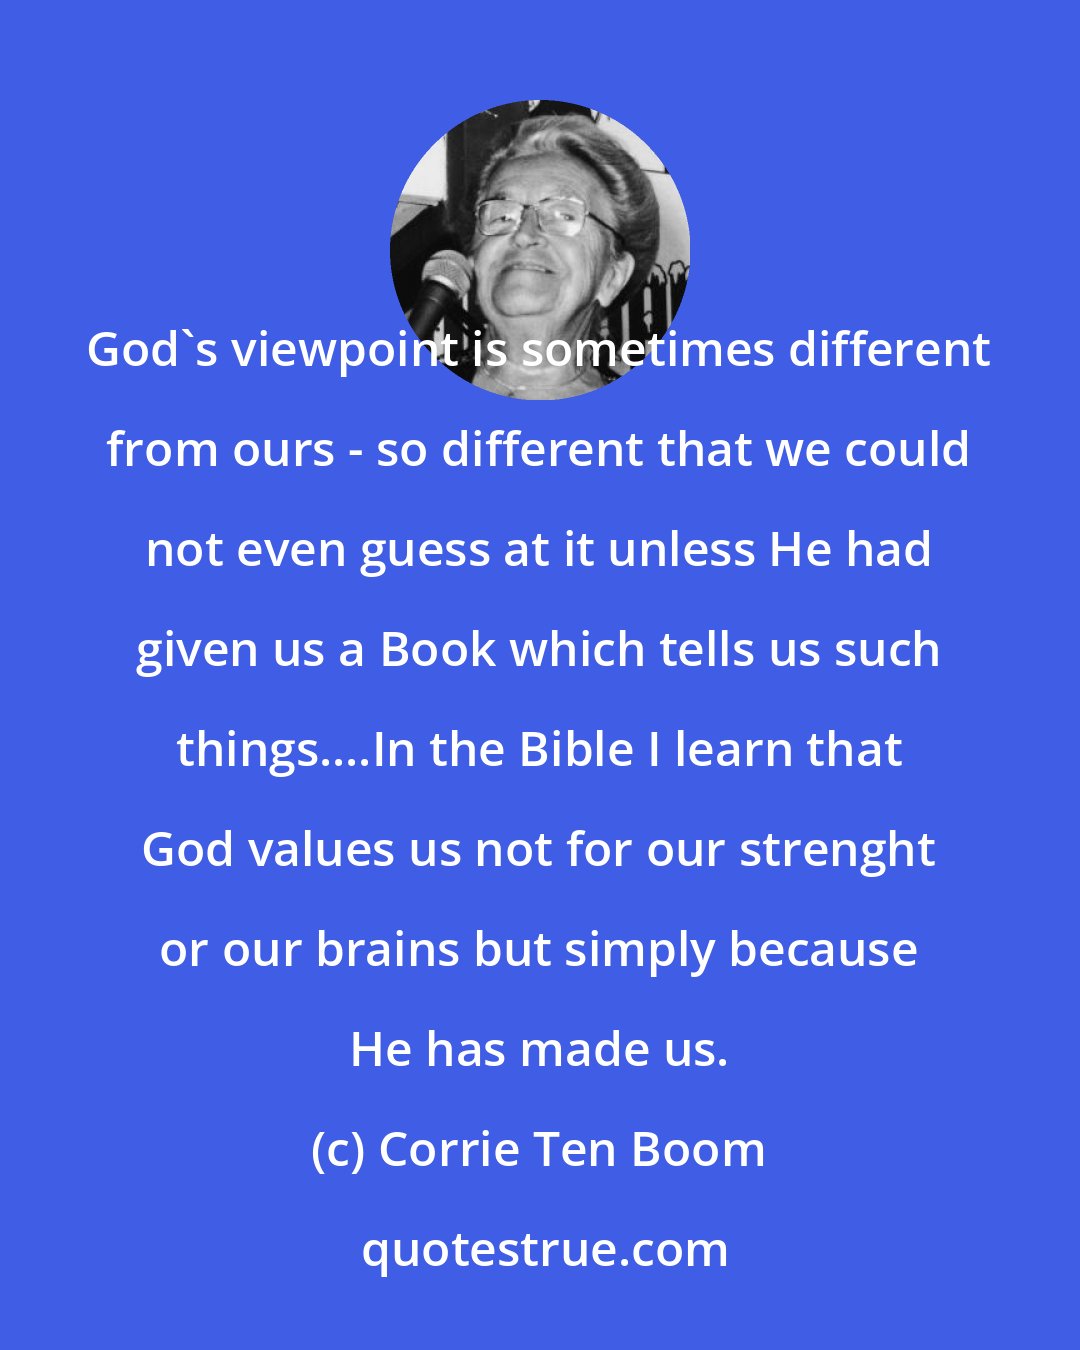 Corrie Ten Boom: God's viewpoint is sometimes different from ours - so different that we could not even guess at it unless He had given us a Book which tells us such things....In the Bible I learn that God values us not for our strenght or our brains but simply because He has made us.